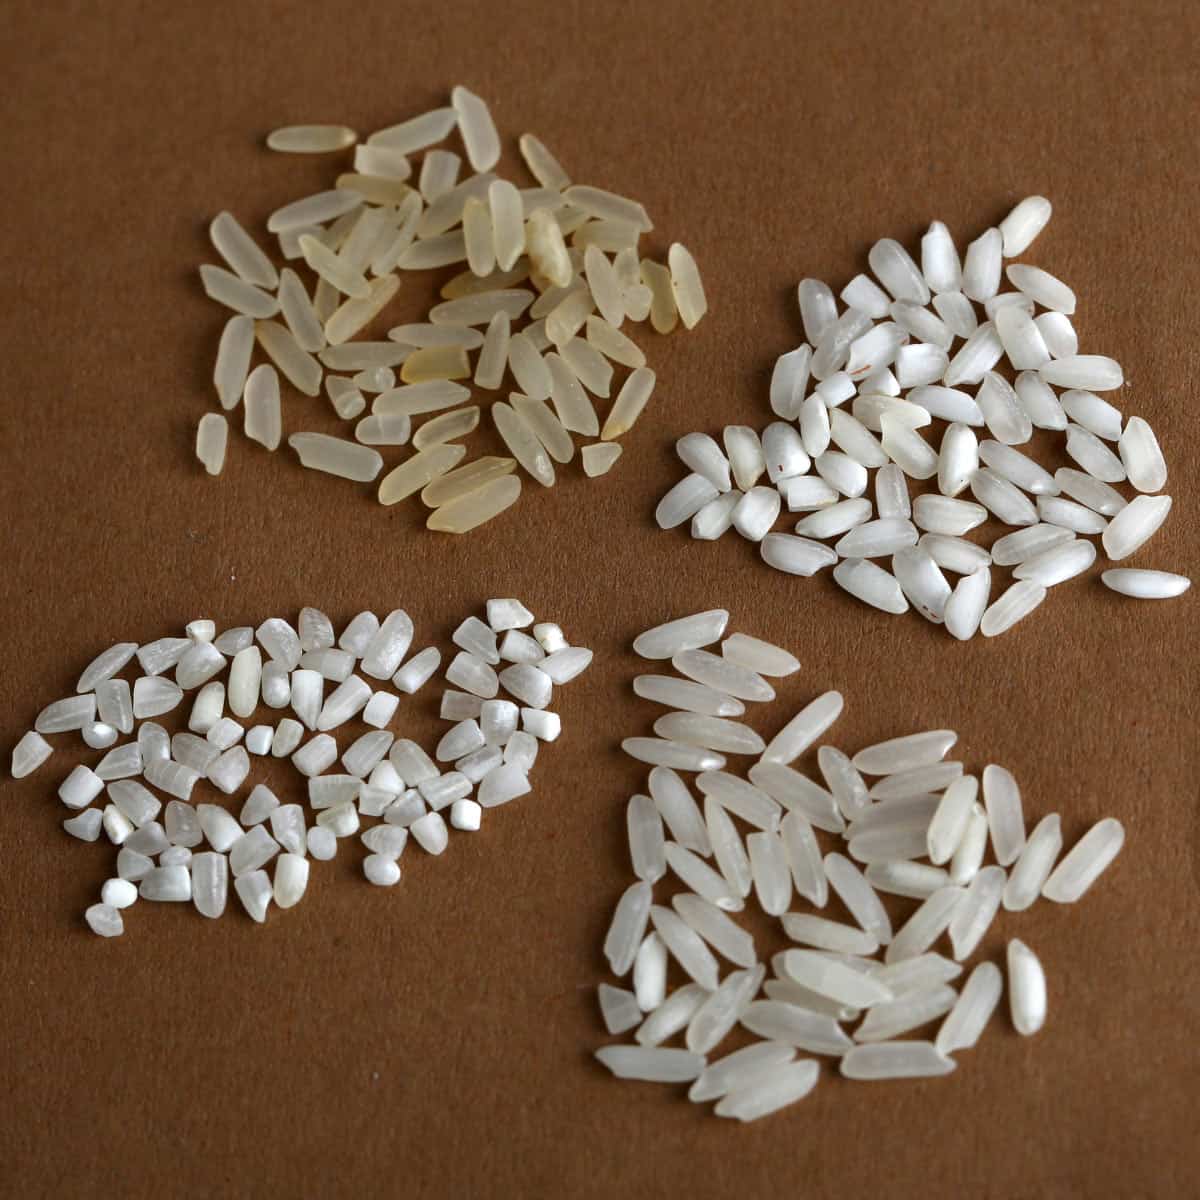 Four types of grains of rice on a brown mat.